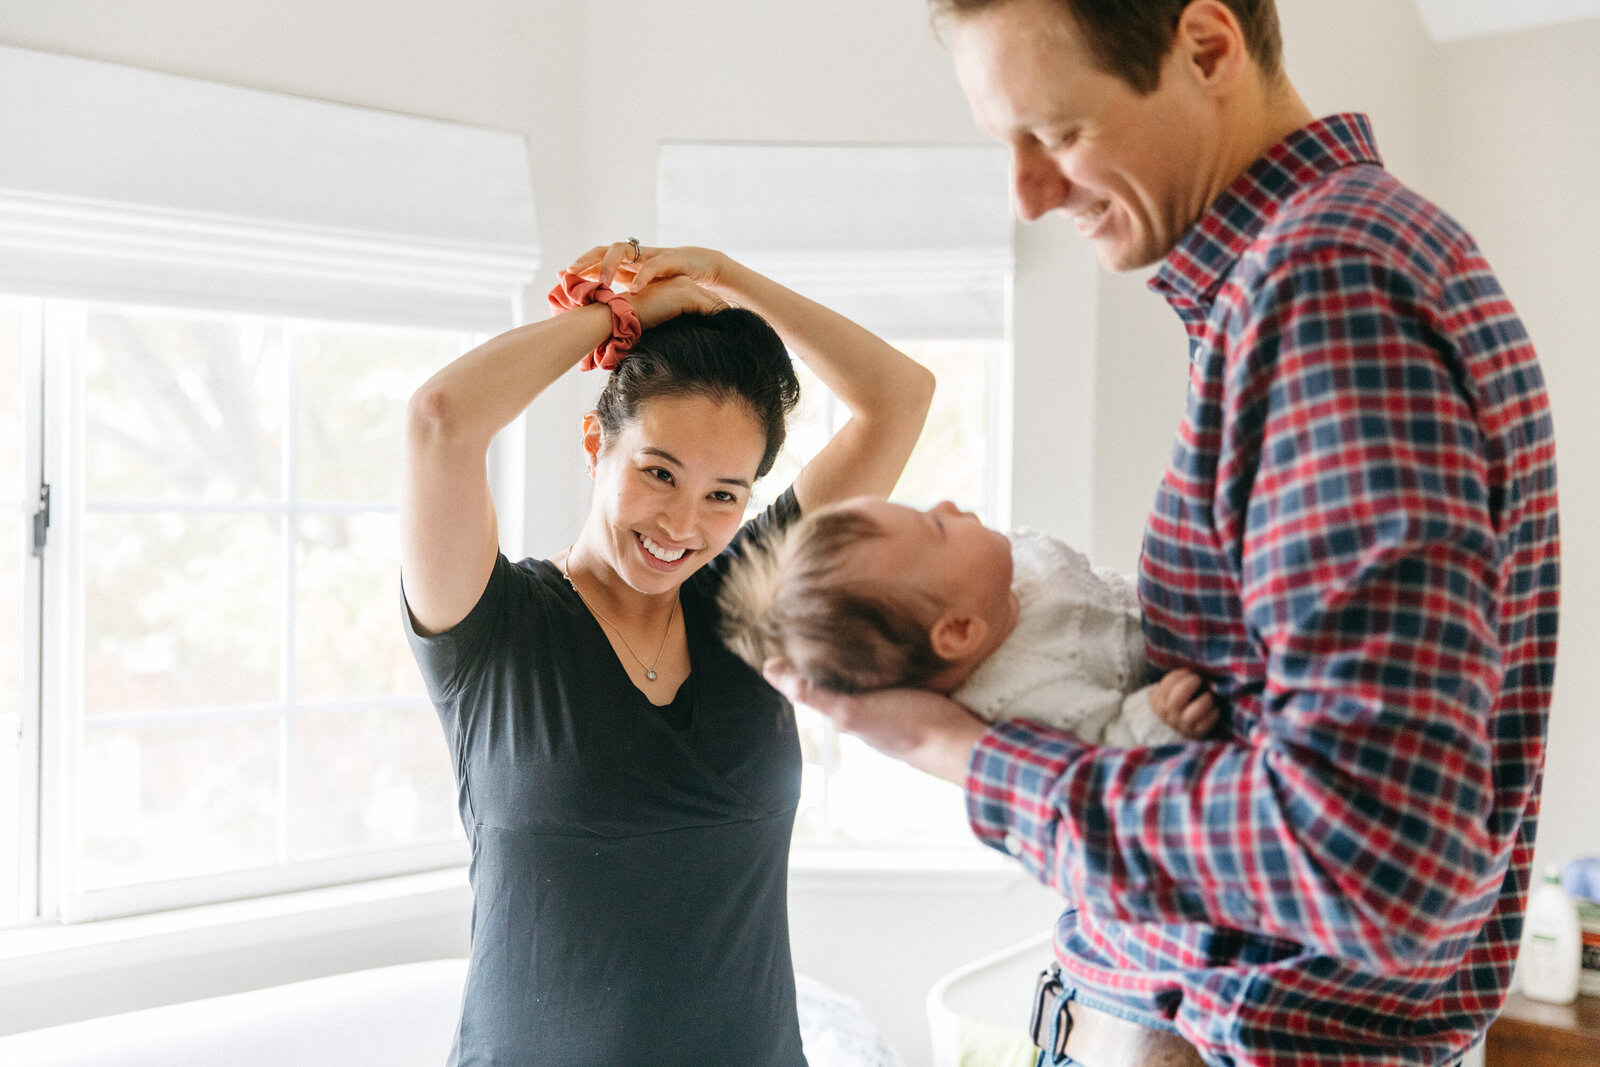 dad in plaid shirt holding newborn baby girl while mom looks on and ties up her hair